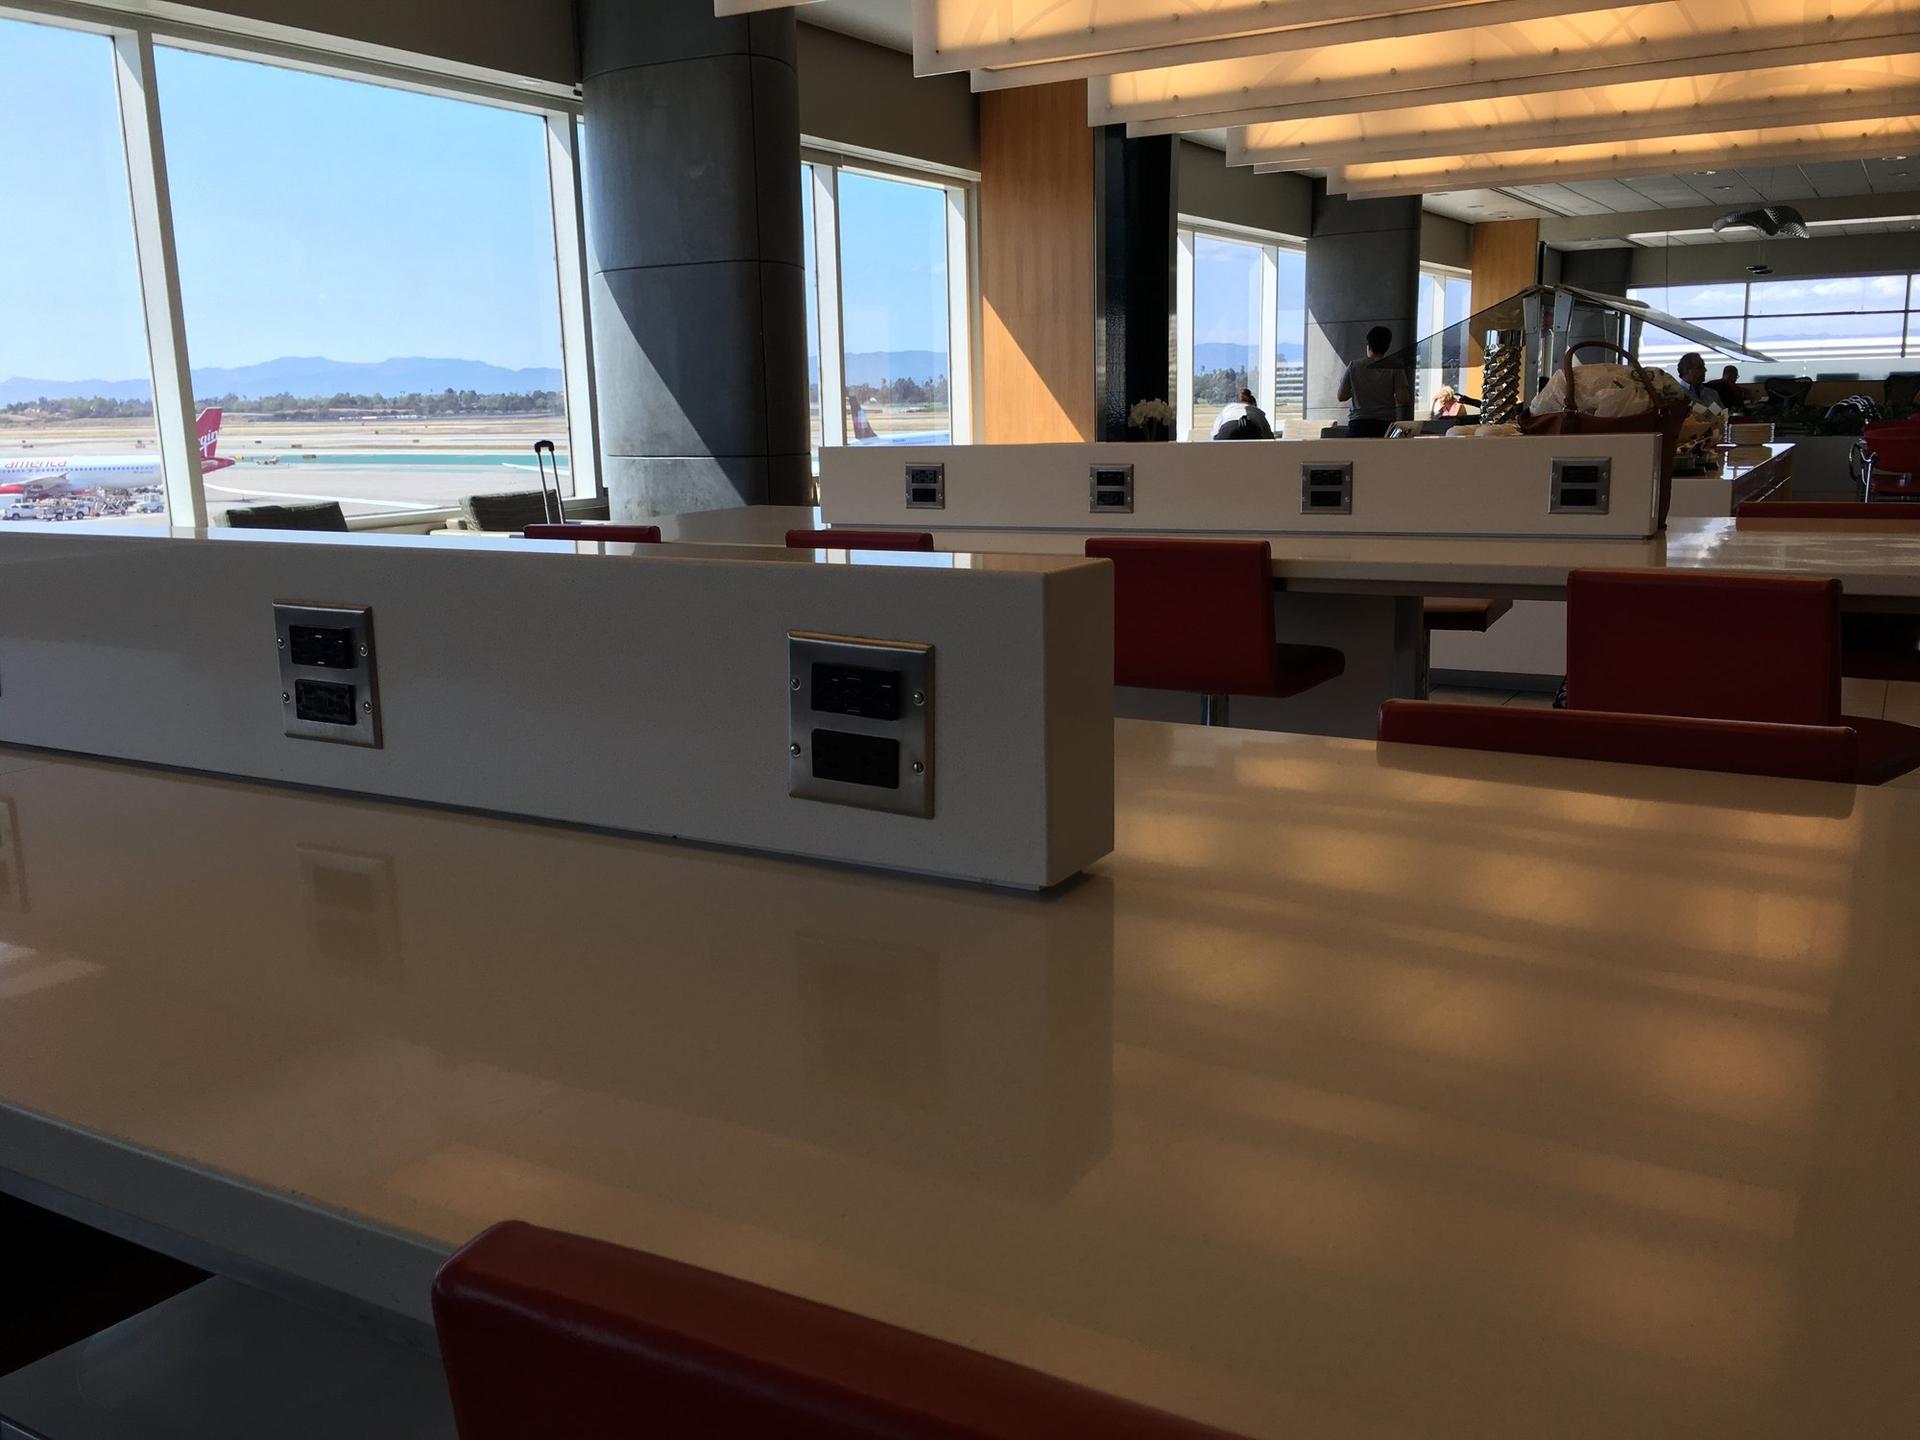 Air Canada Maple Leaf Lounge image 23 of 24